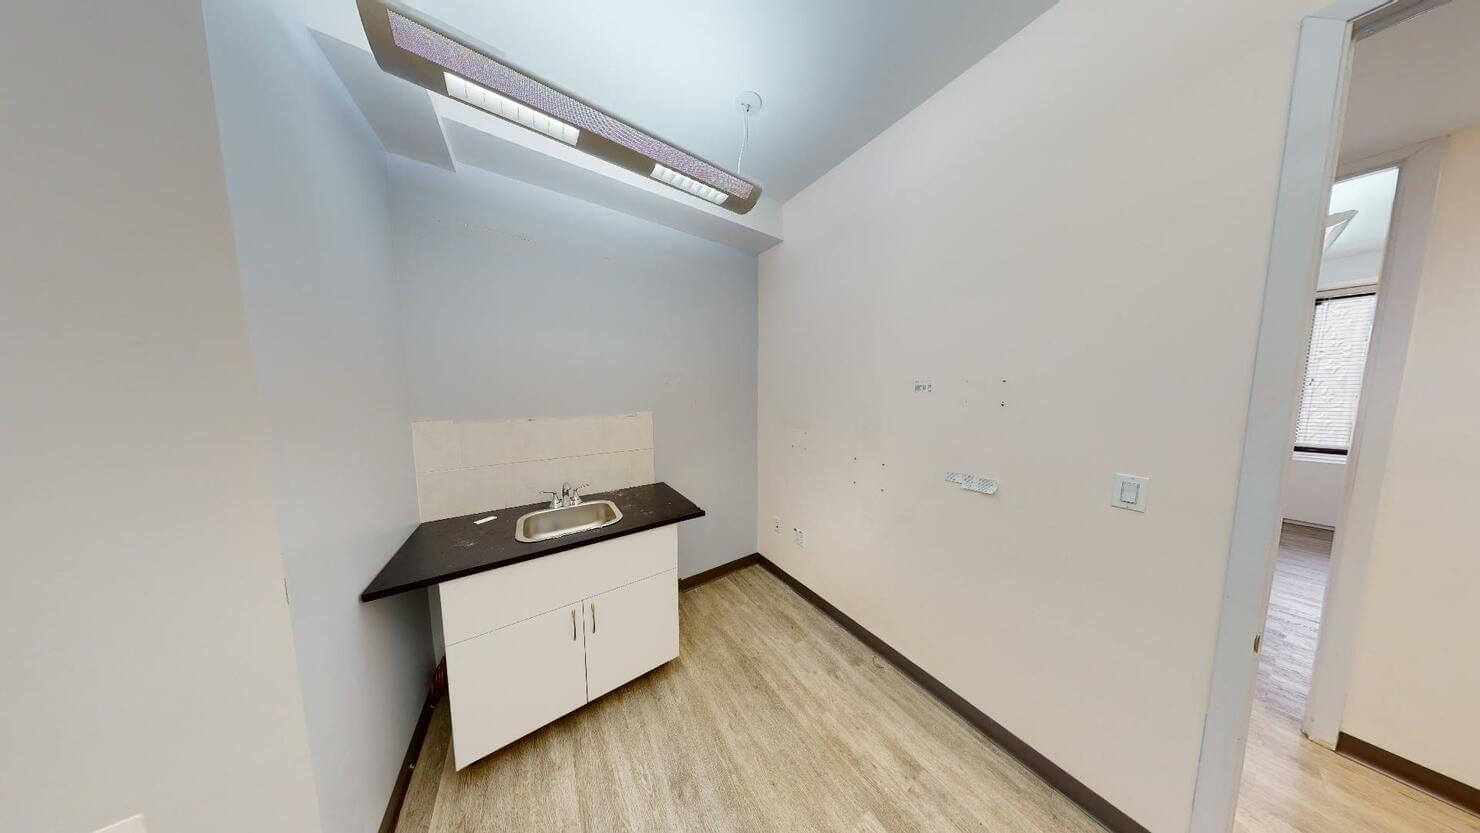 369 Lexington Avenue Office Space - Treatment Room with Sink